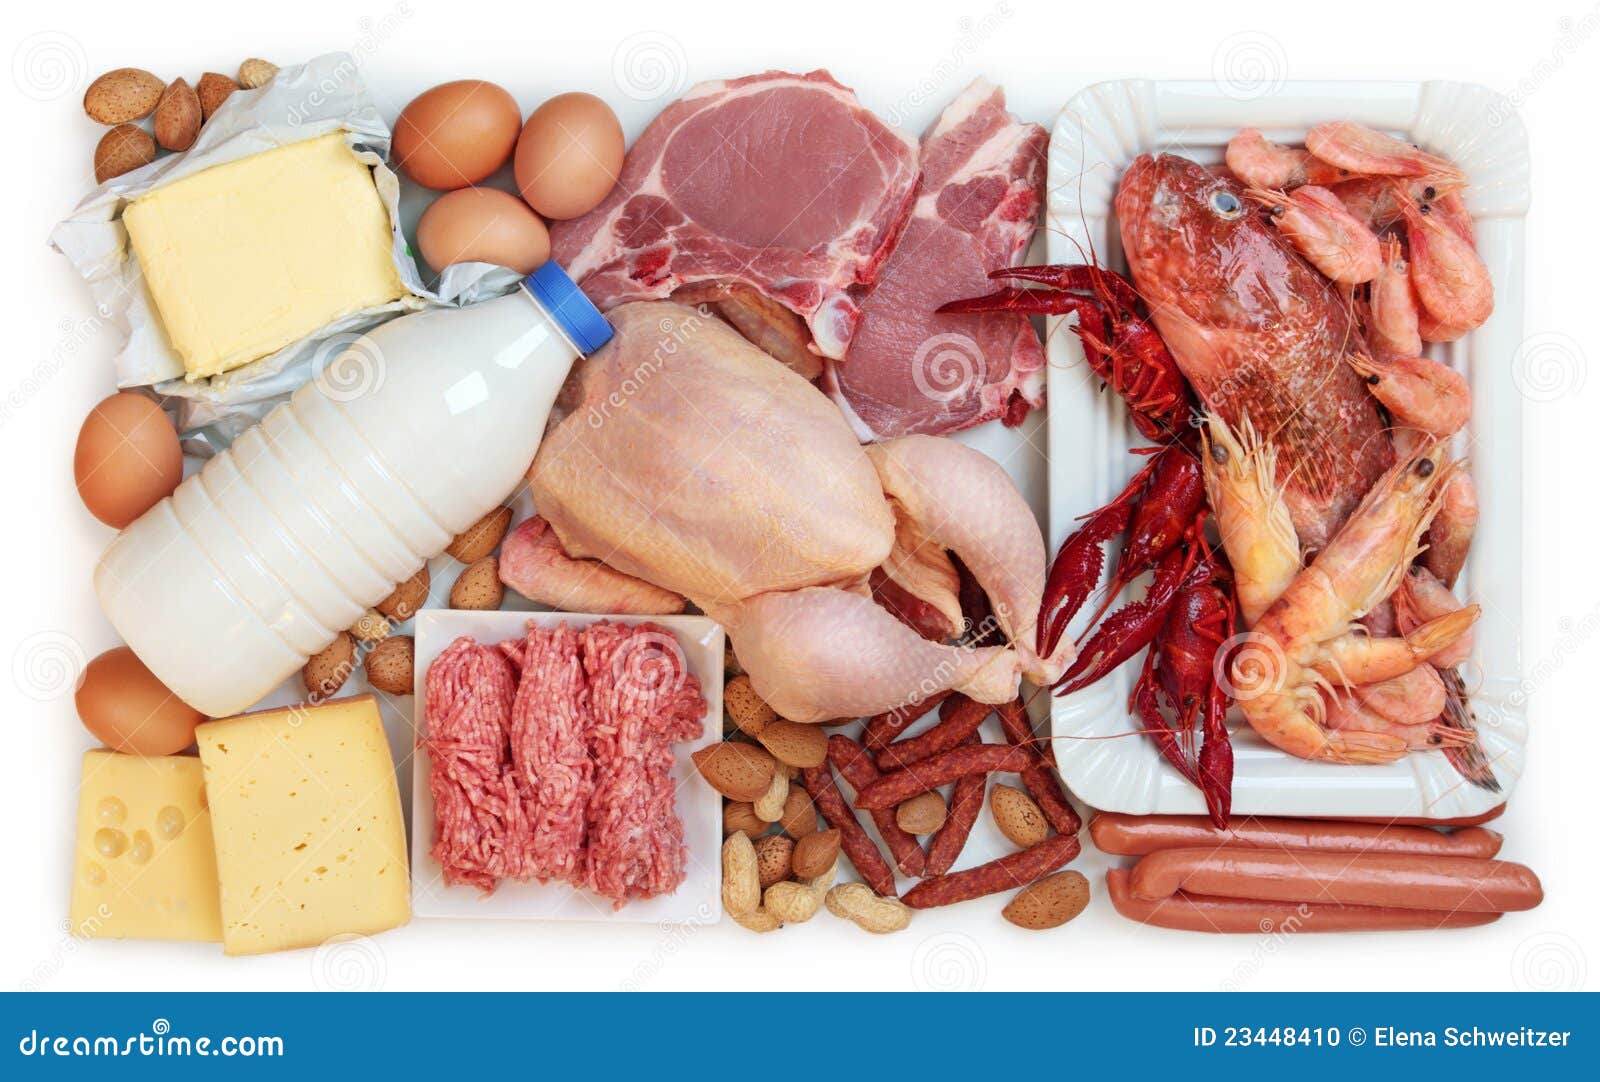 2,377 Food High Animal Protein Stock Photos - Free & Royalty-Free Stock  Photos from Dreamstime